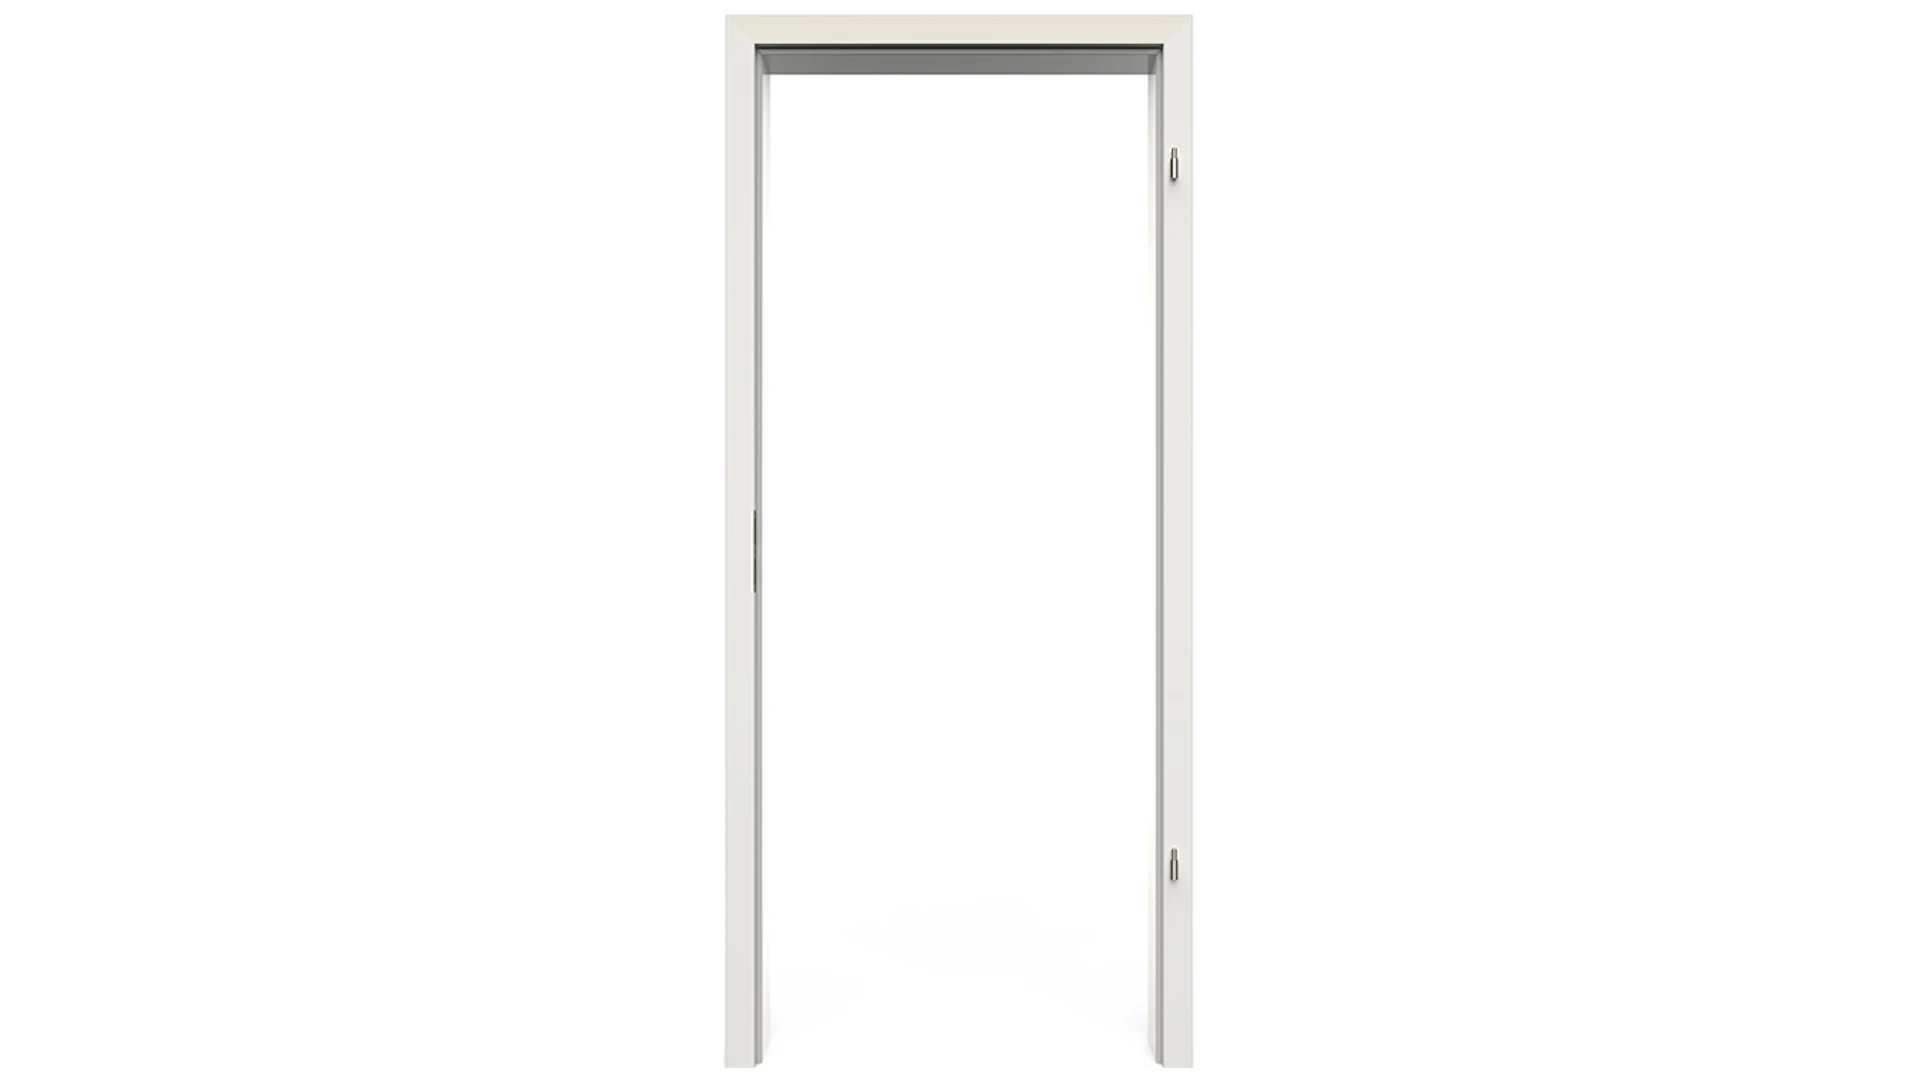 planeo Standard frame, rounded edge - CPL White 9010 - 2110 x 610 x 180 mm DIN right